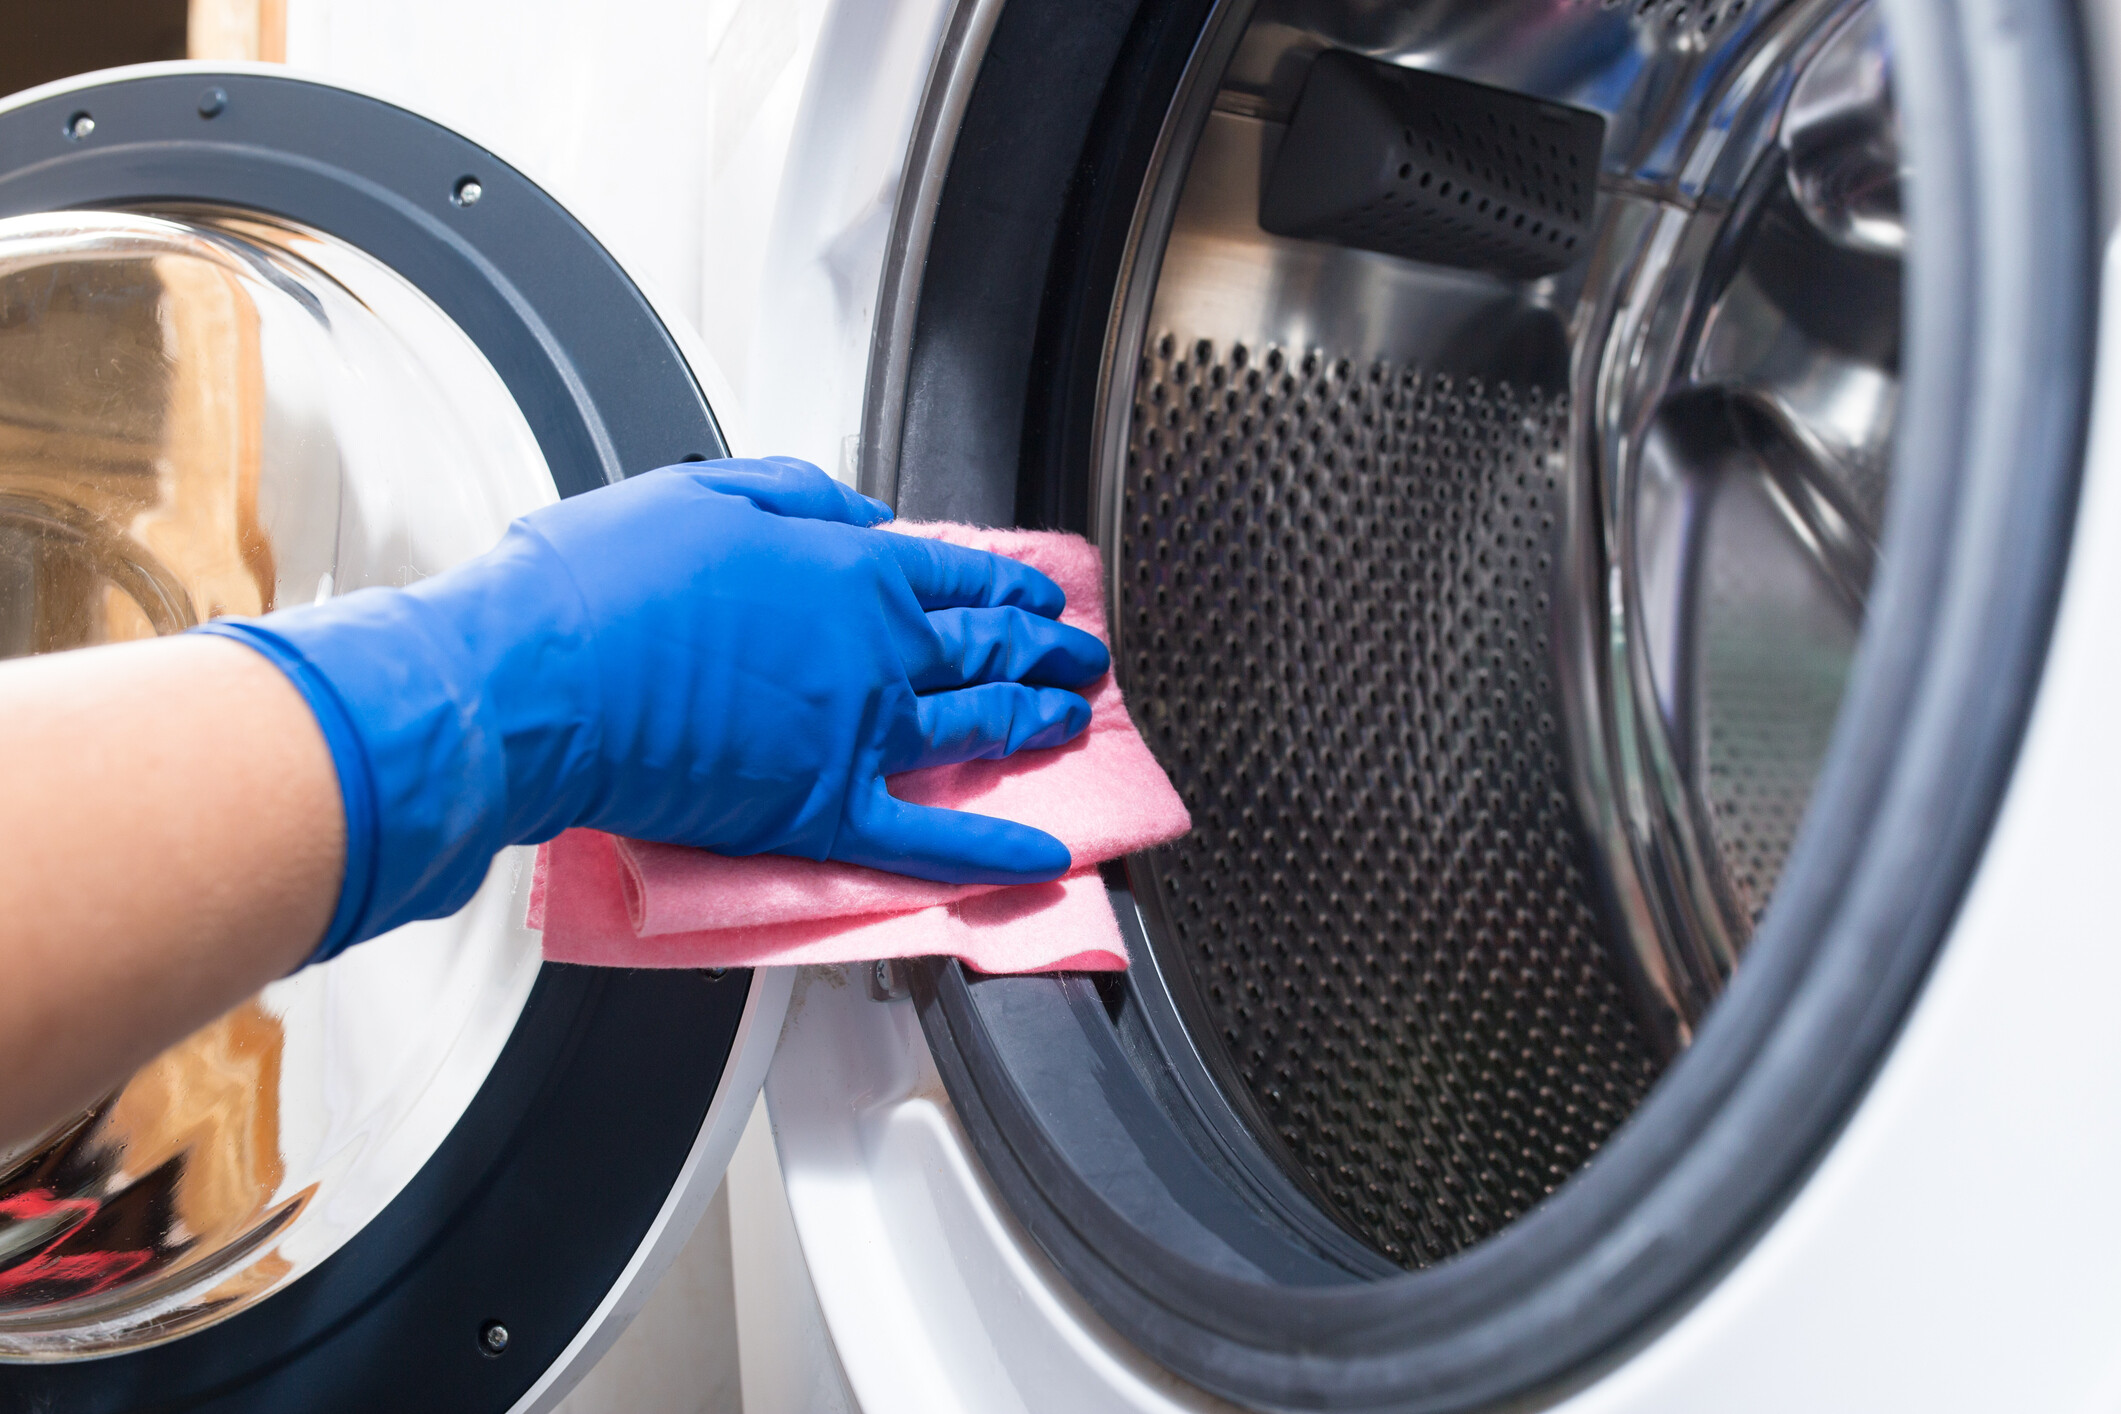 A person with blue gloves wiping the door of a washing machine.